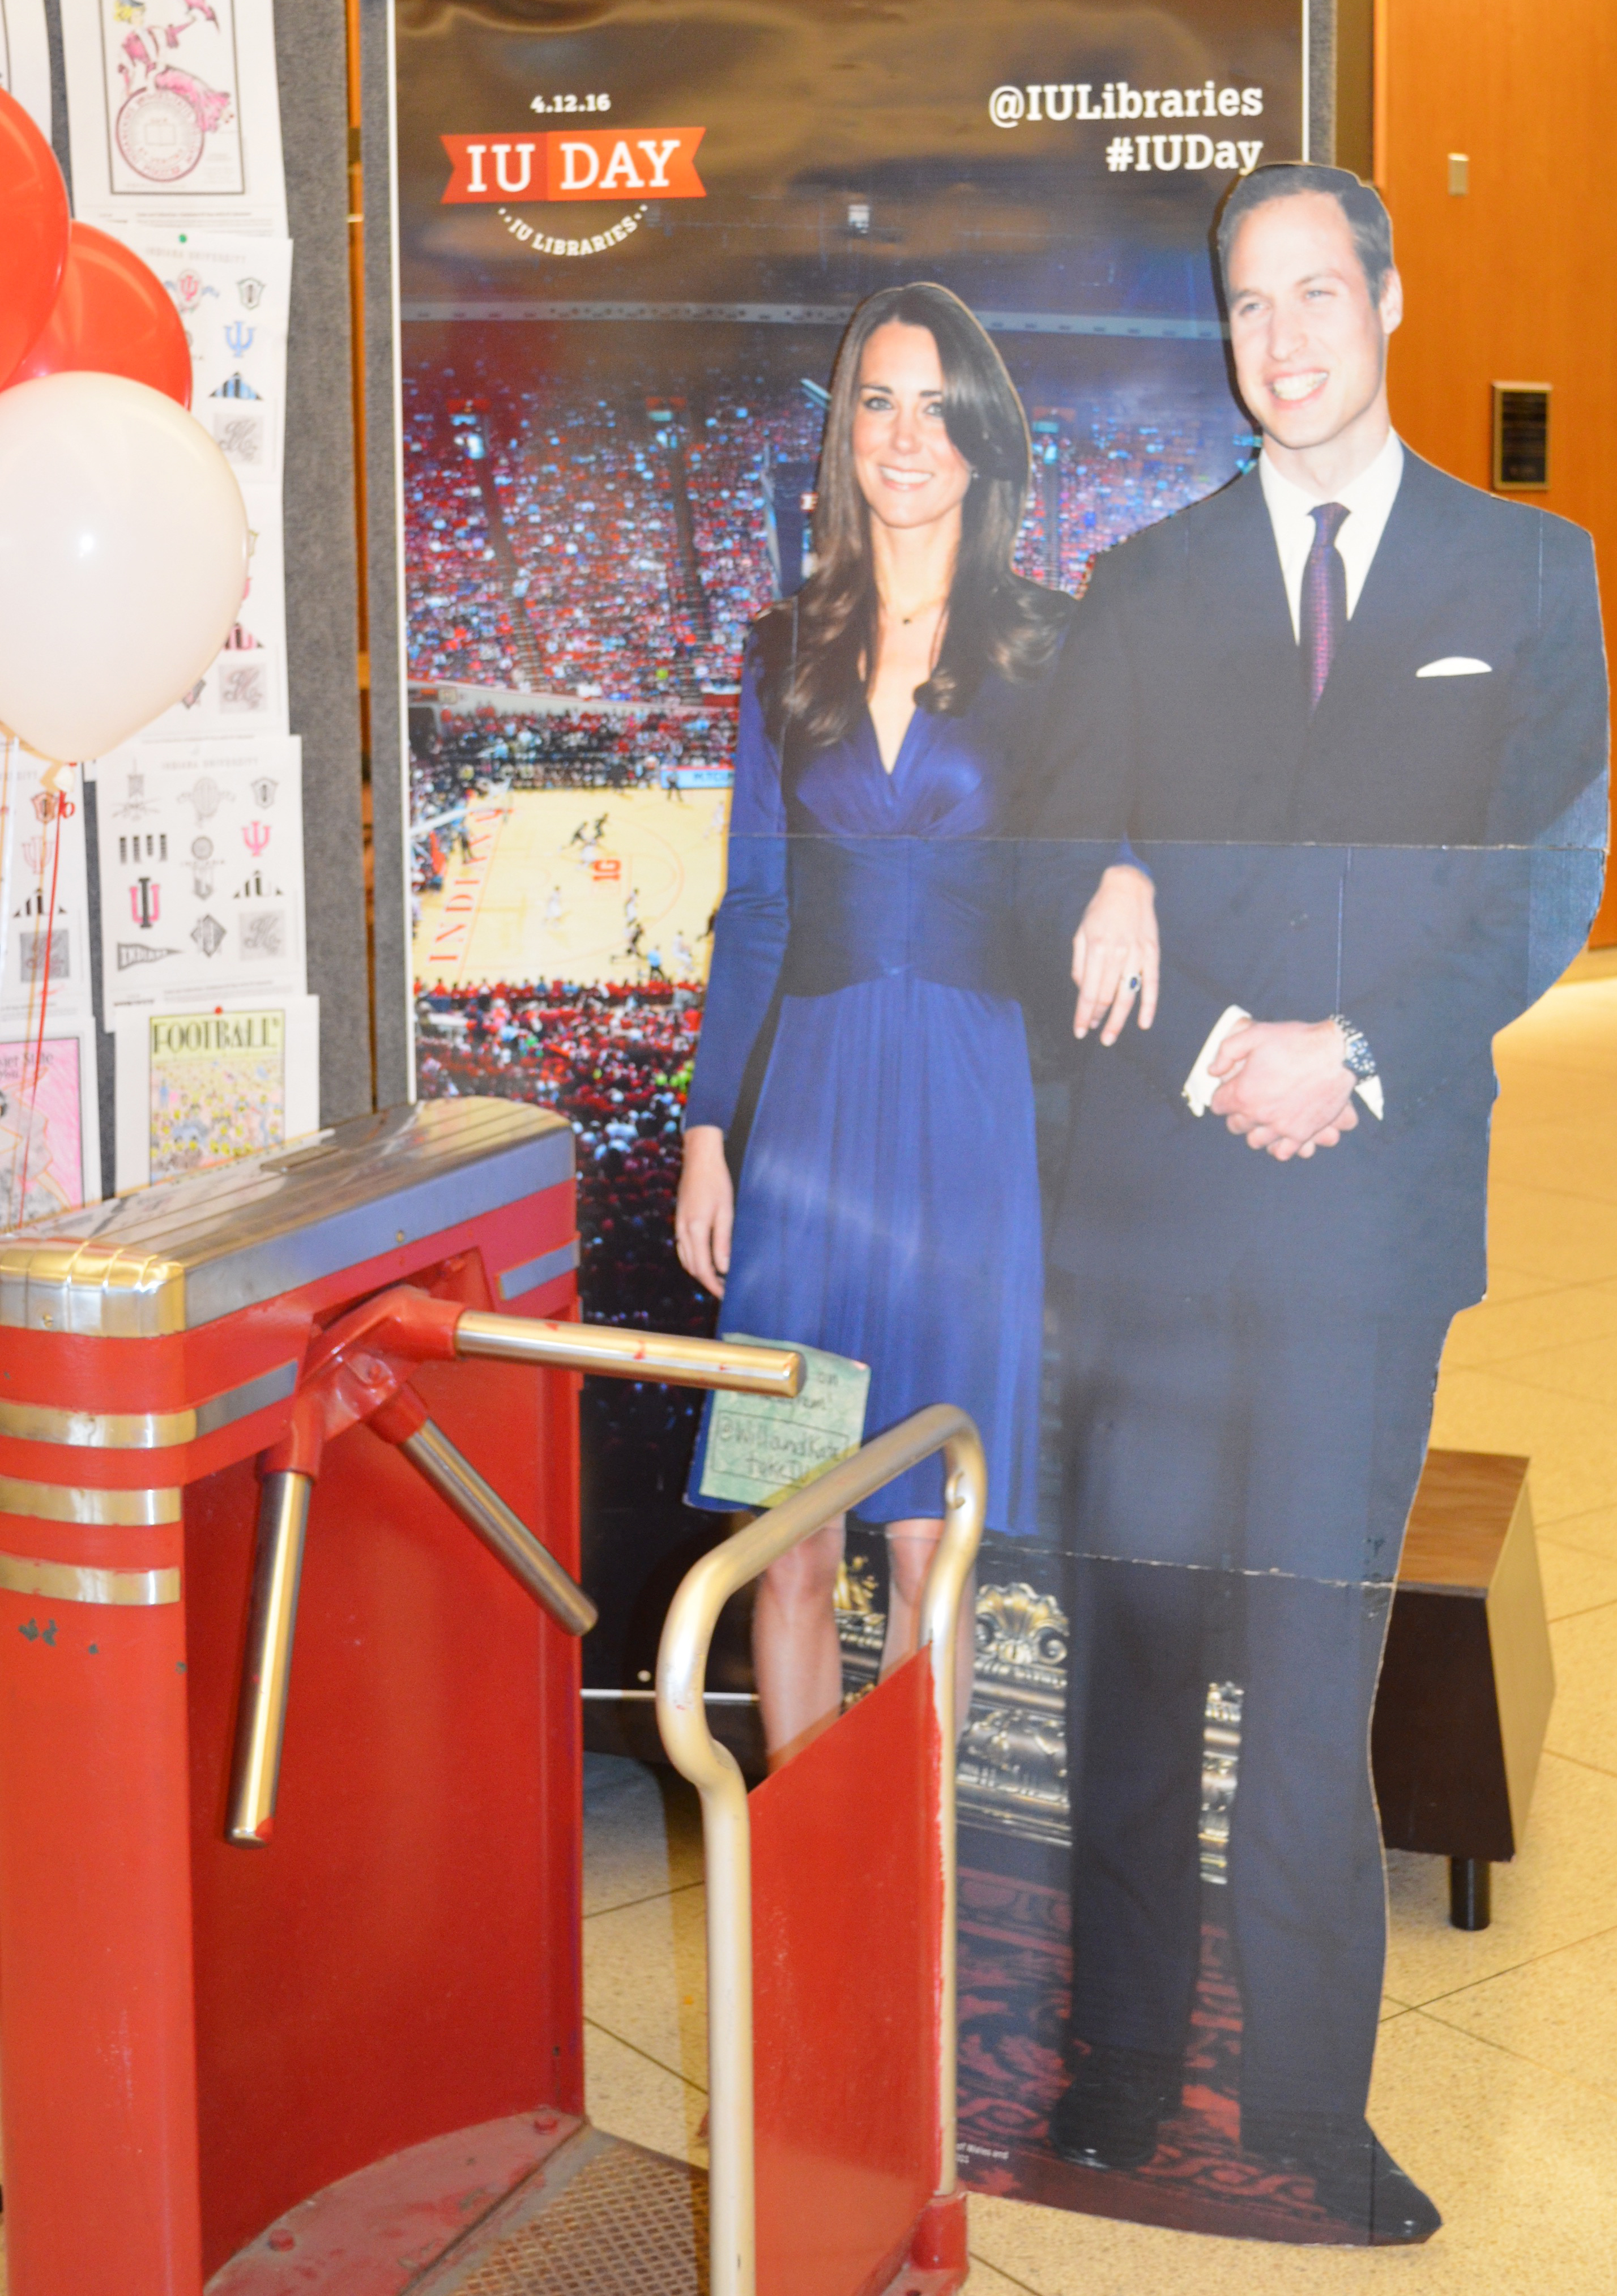 Cardboard cutout of the Royal Couple with the Assembly Hall turnstyle